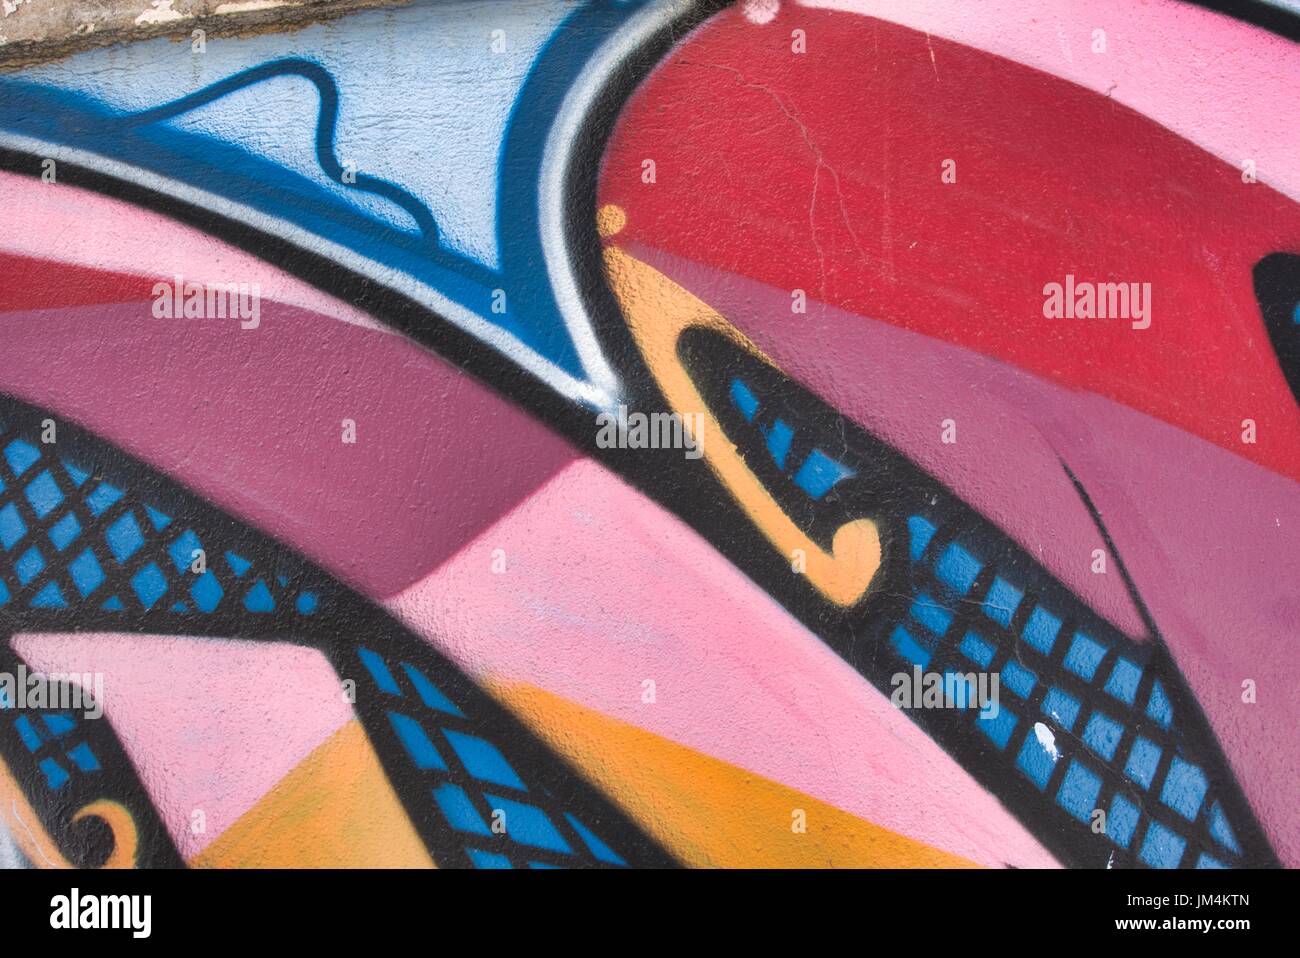 Details of grafiti with vivid colors on wall. Useful for backgrounds, backdrops and concept work. Stock Photo